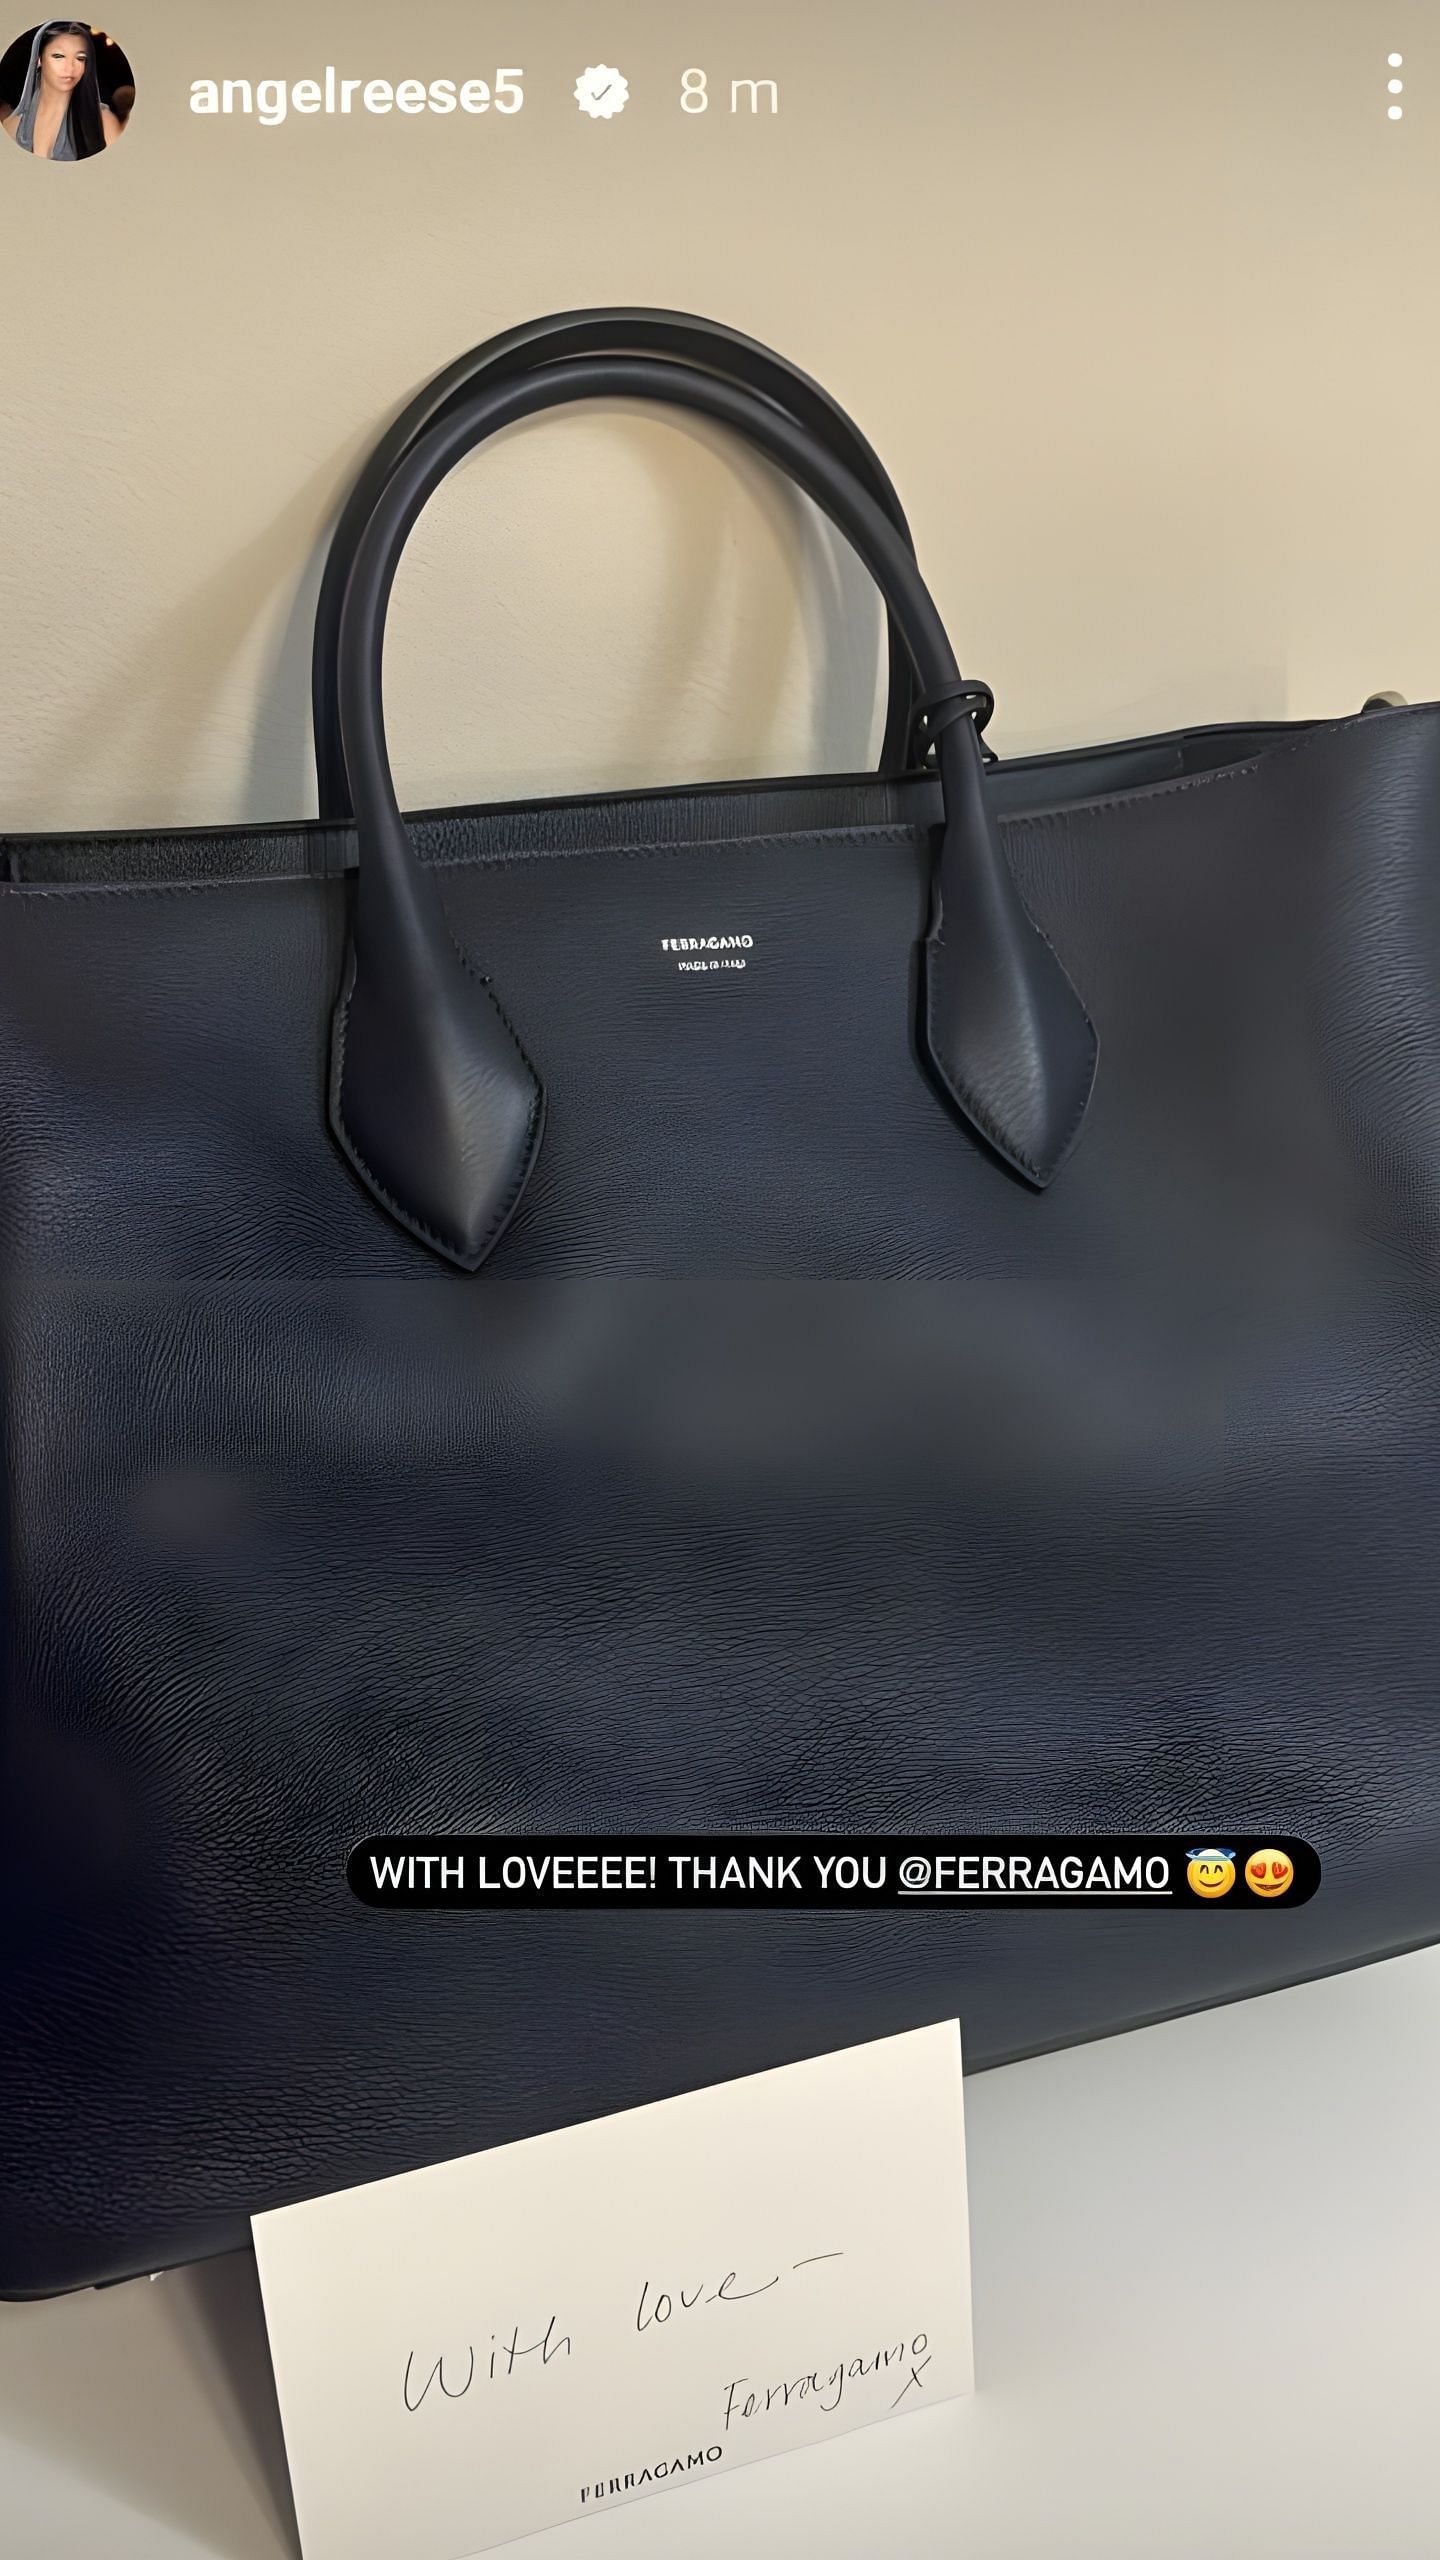 Angel Reese thanked Ferragamo for the gift